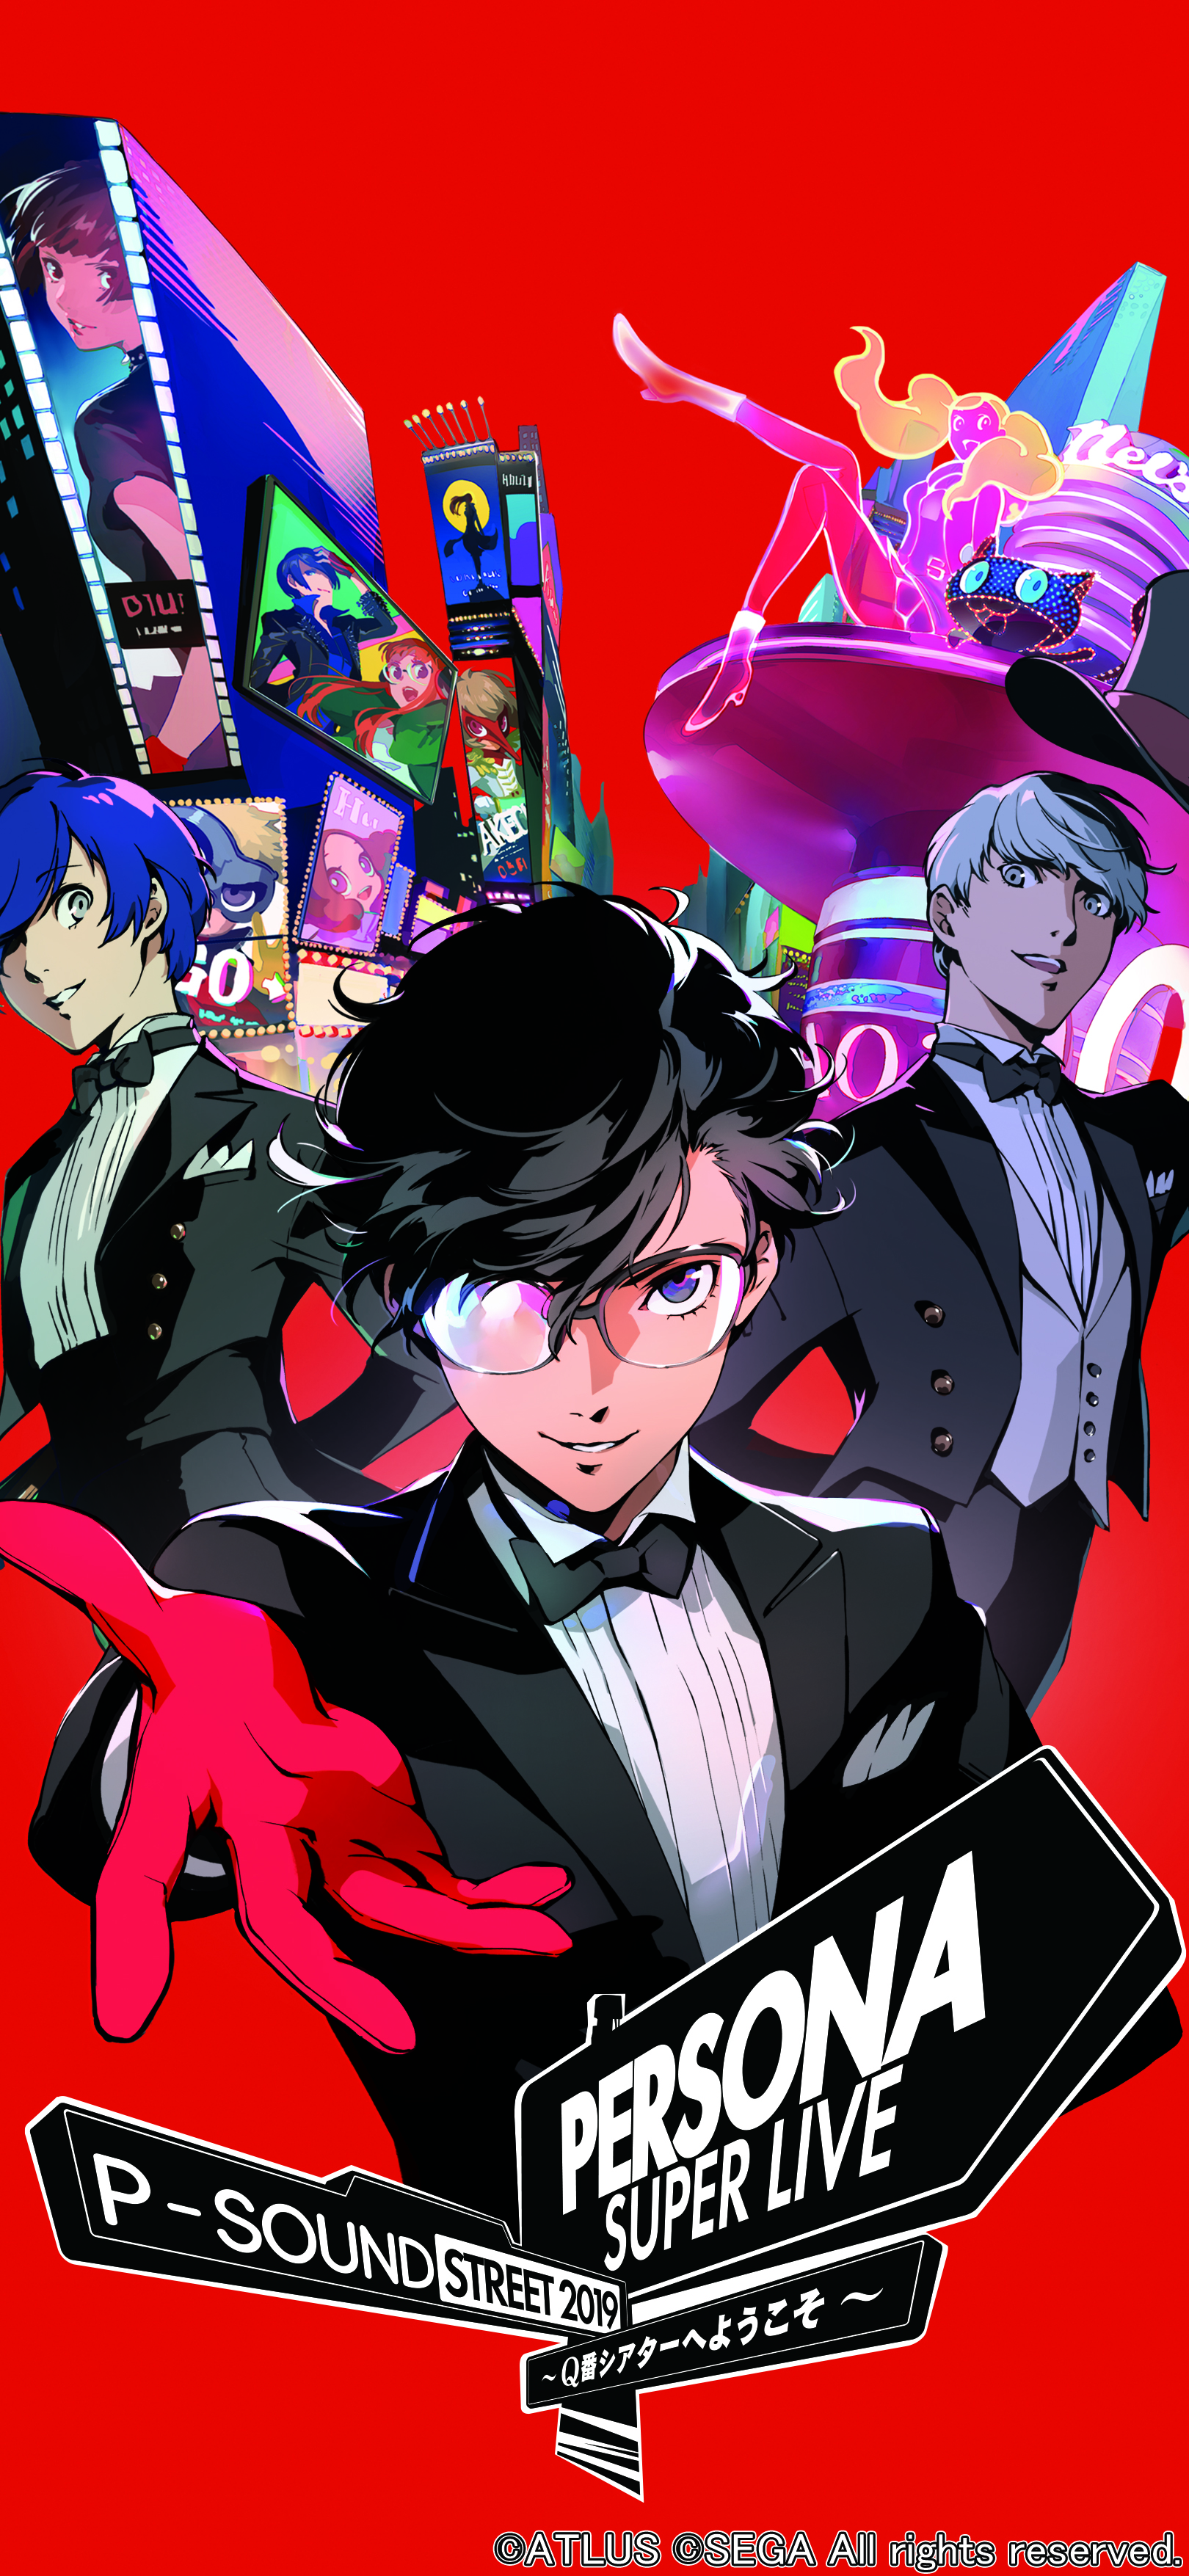 Persona Central Phone Wallpaper Is Being Given Away Featuring The Key Art For Persona Super Live 19 Welcome To No Q Theater A Special Alteration Has Been Made To It